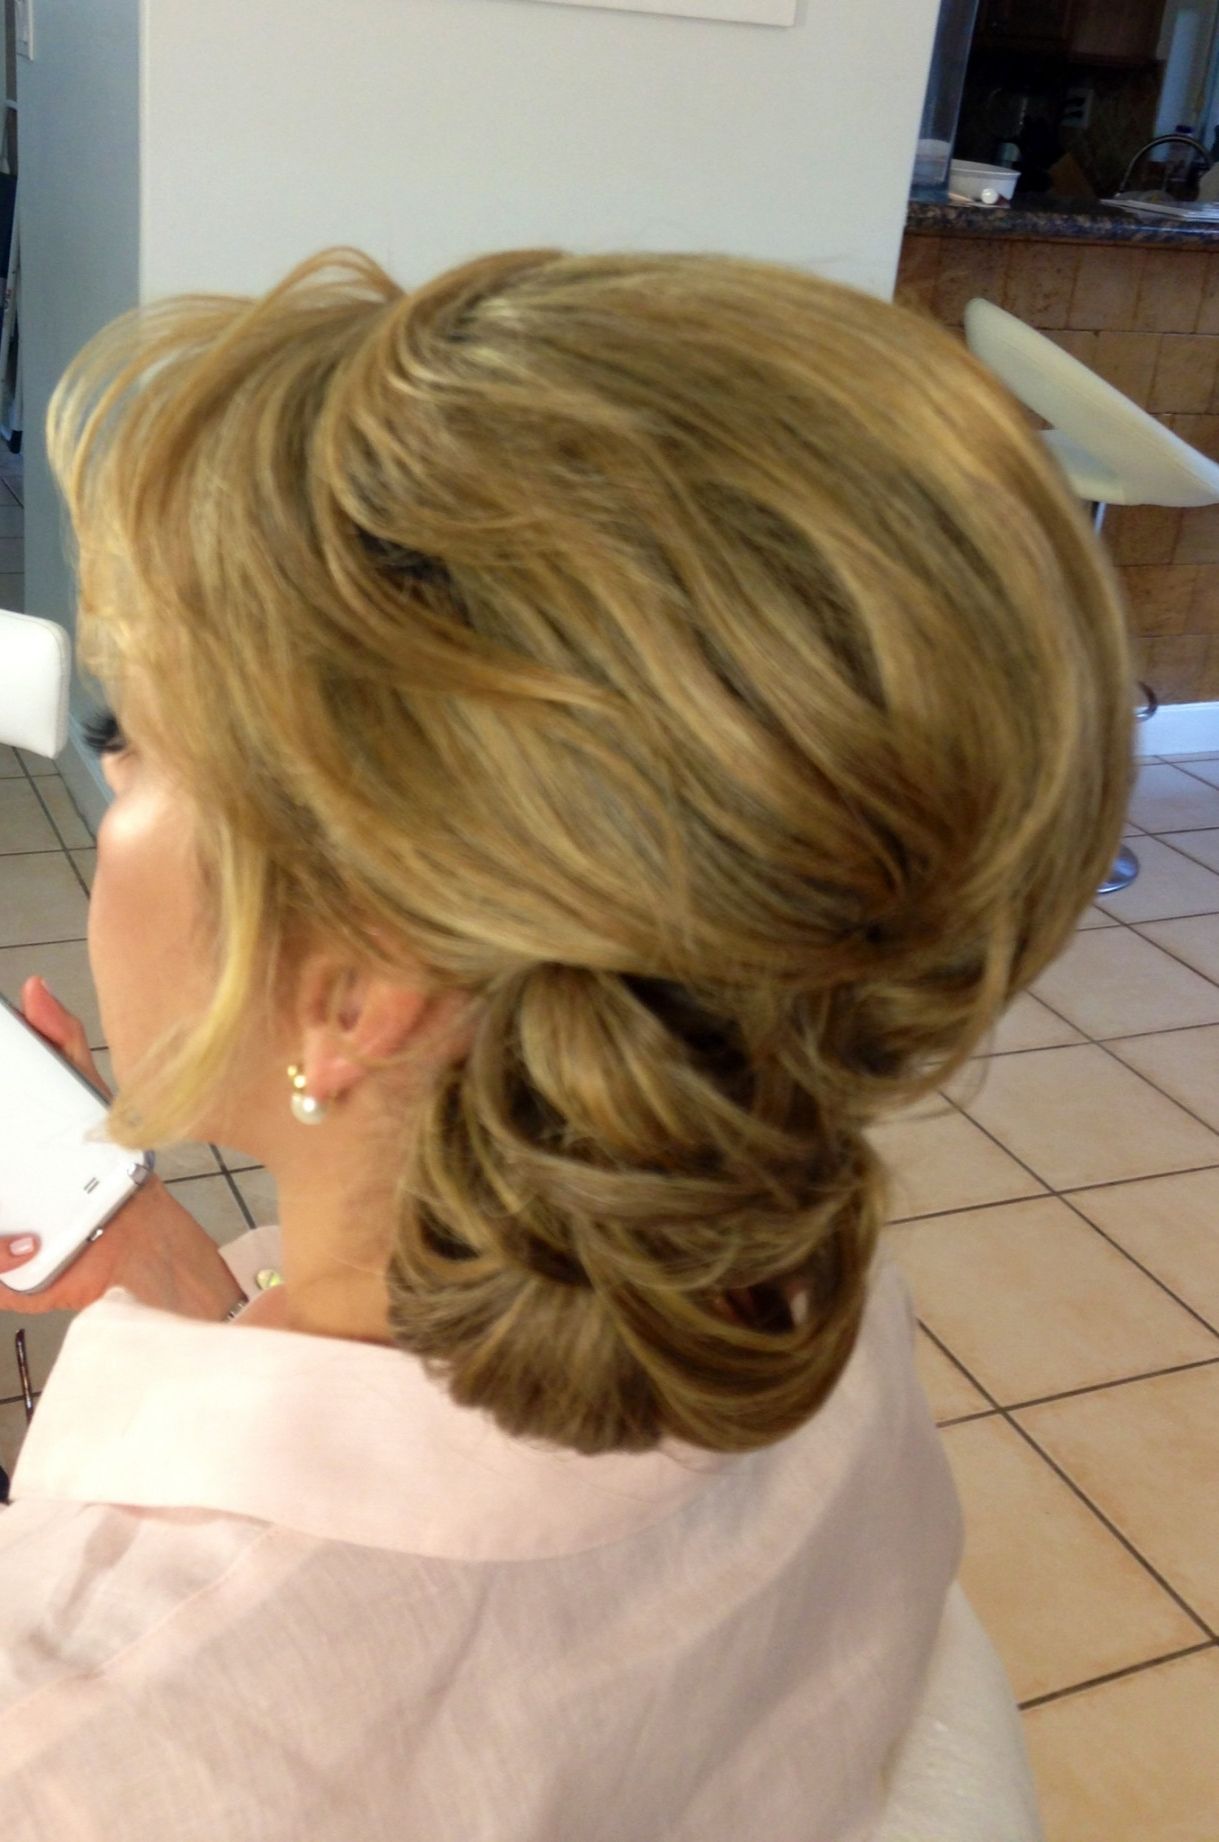 Half Up Hairstyles For Mother Of The Bride | Justswimfl | Latest Within Mother Of The Bride Half Updo Hairstyles (View 4 of 15)